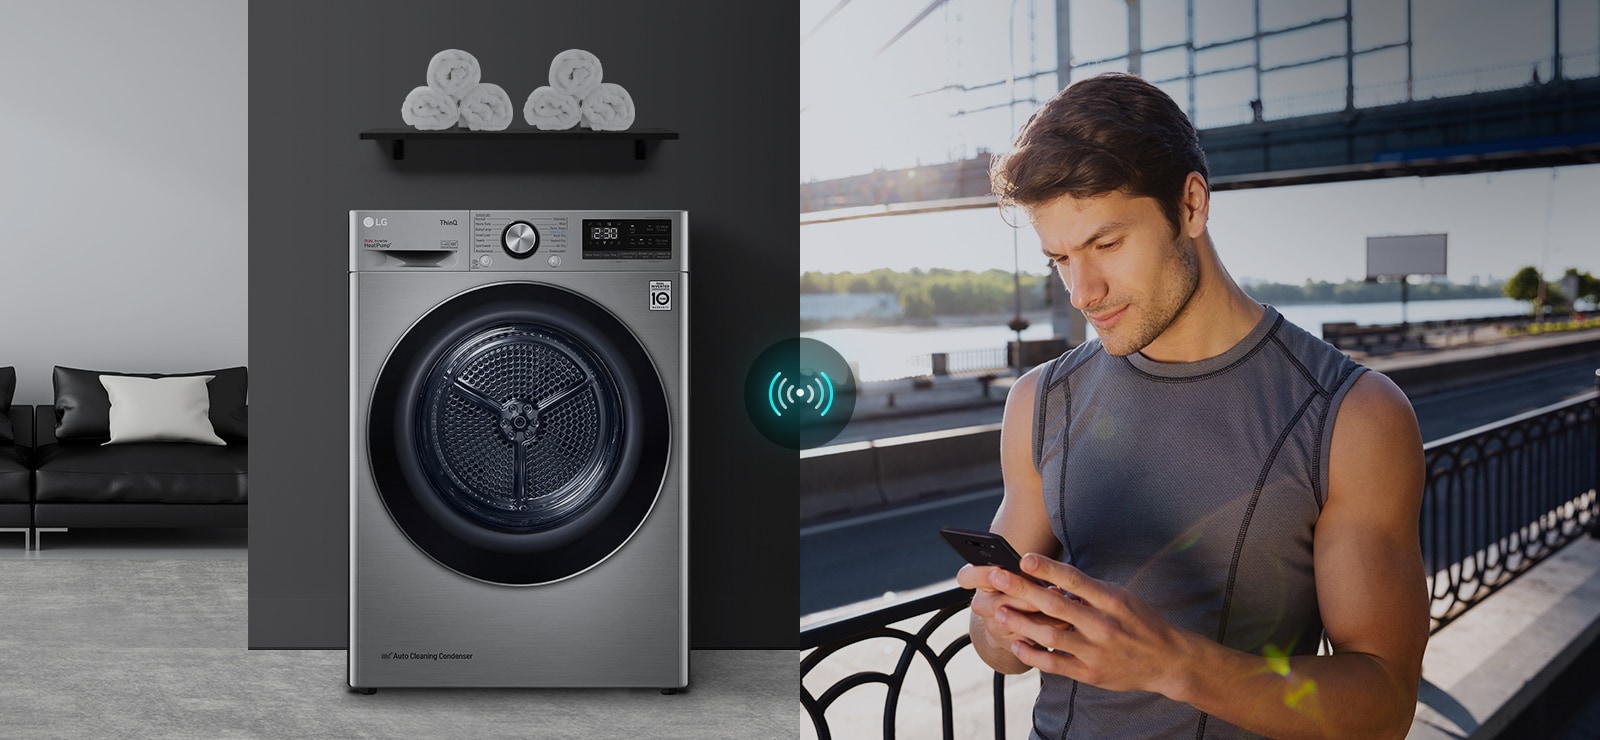 Three icons at the top indicate there are three images in a carousel. The first icon, labelled "Remote Control", is red. An image on the left shows the dryer. An image on the right shows a man looking down at his phone from outside. In the center is a connectivity icon showing a control the dryer through app.